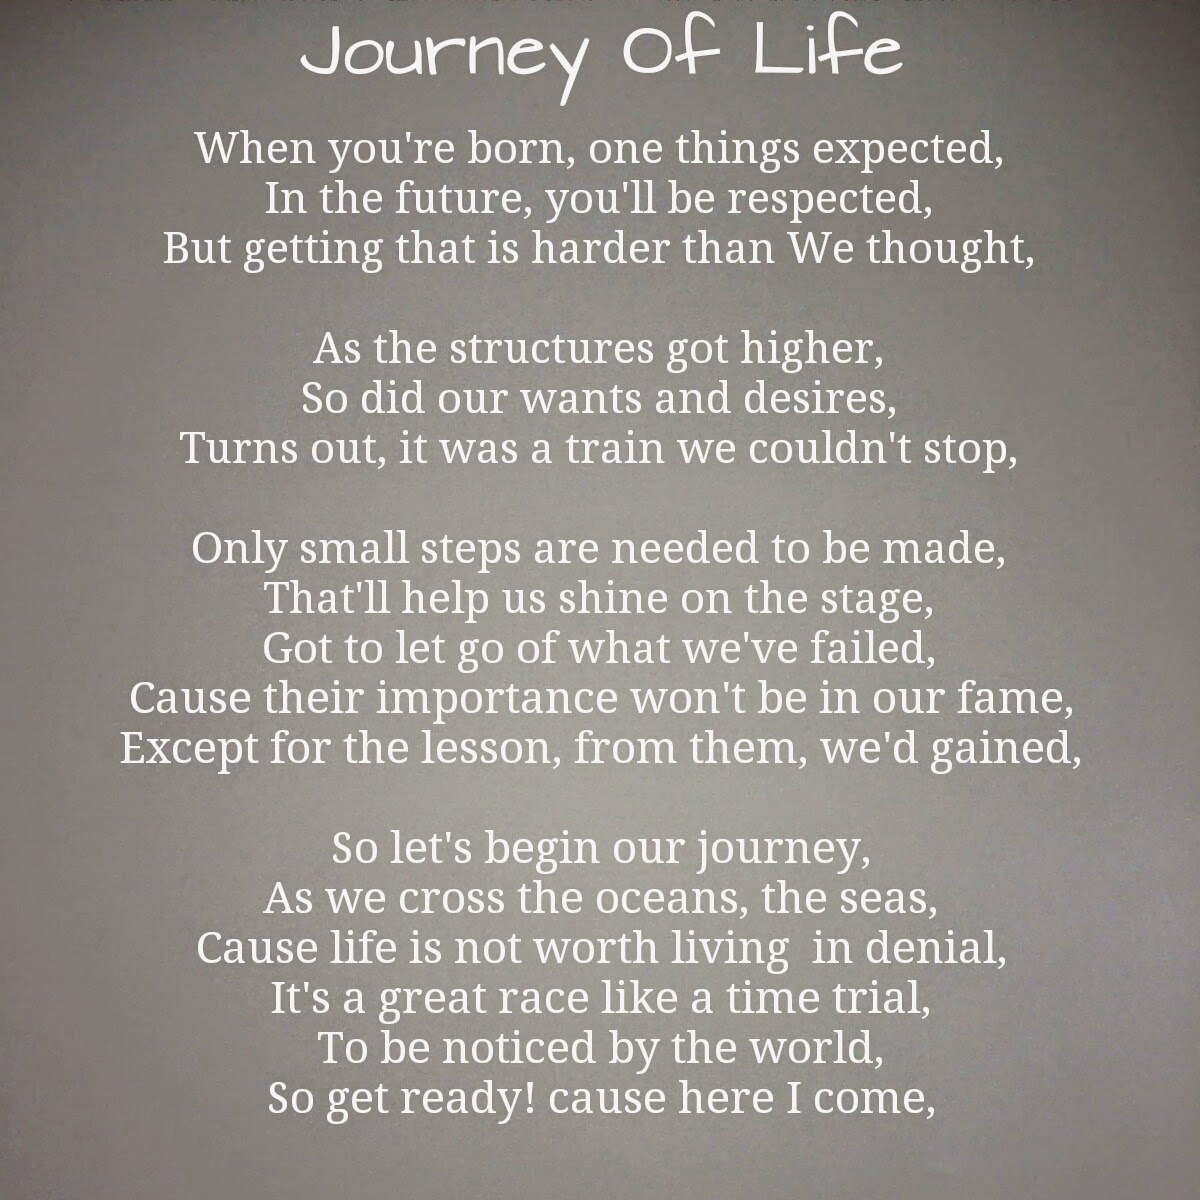 the journey of life poem